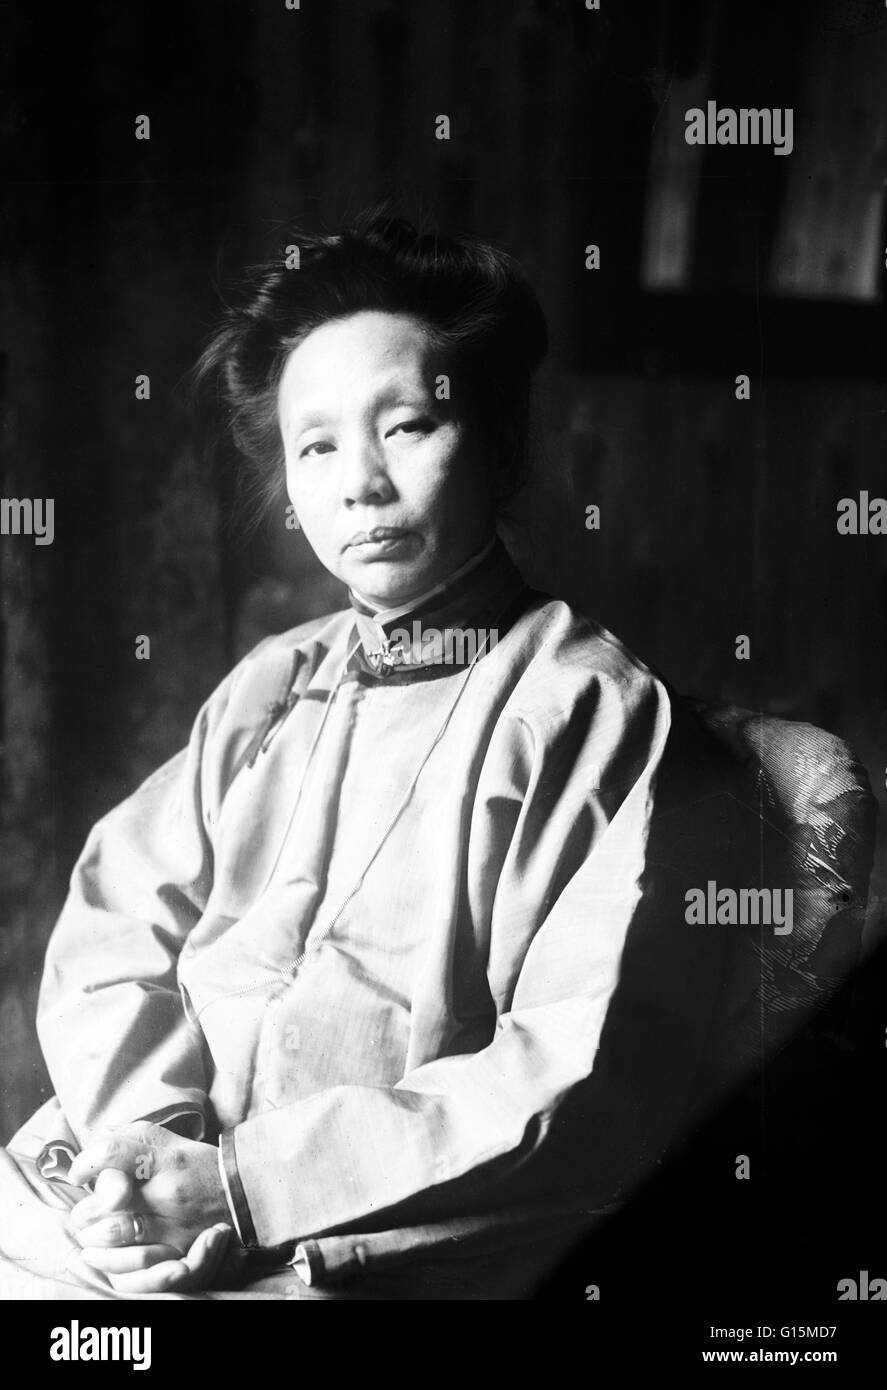 Yamei Kin was a Chinese physician and pioneer of tofu in America during World War I. Kin was a graduate of the Woman's Medical College in New York and worked as a doctor in China. During World War I she worked closely with the USDA conducting experiments Stock Photo